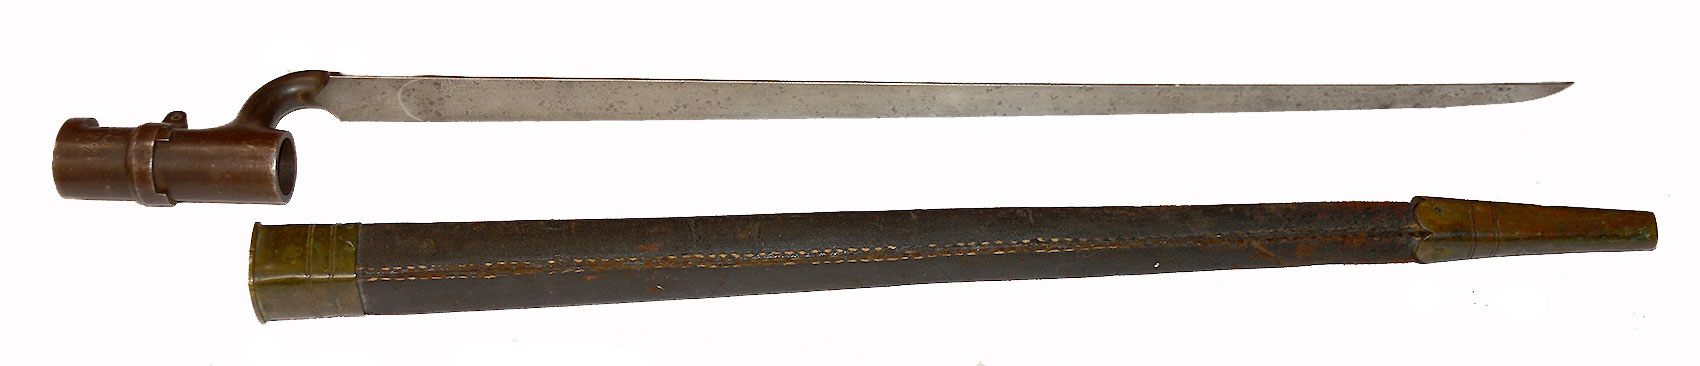 P1853 ENFIELD RIFLE MUSKET BAYONET AND SCABBARD 